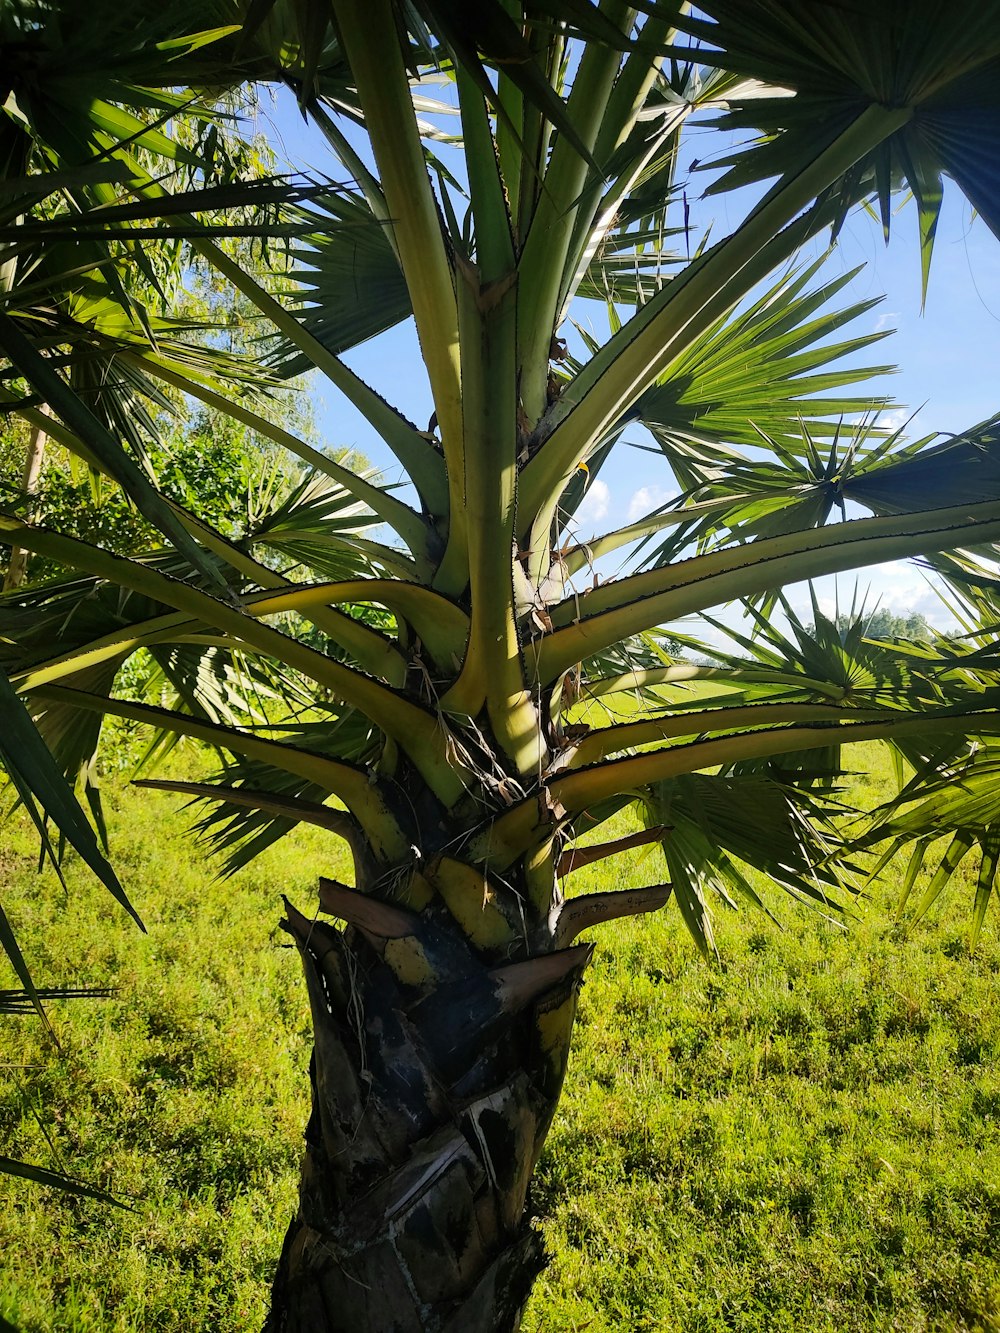 a palm tree in the middle of a grassy field